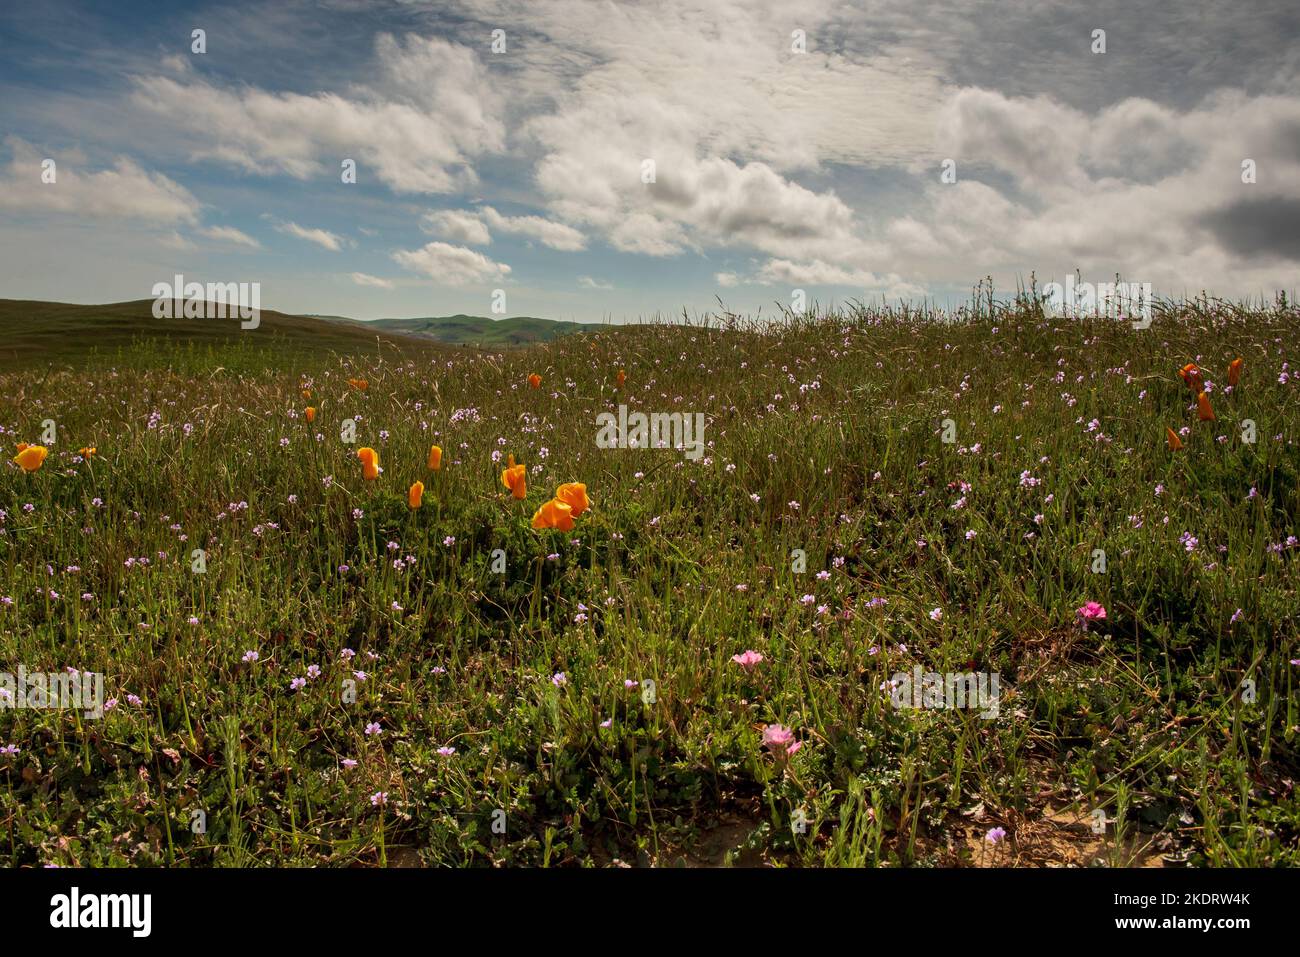 Landscape view  of spring flowers in California, USA,  on a partly cloudy day featuring the california poppy Stock Photo